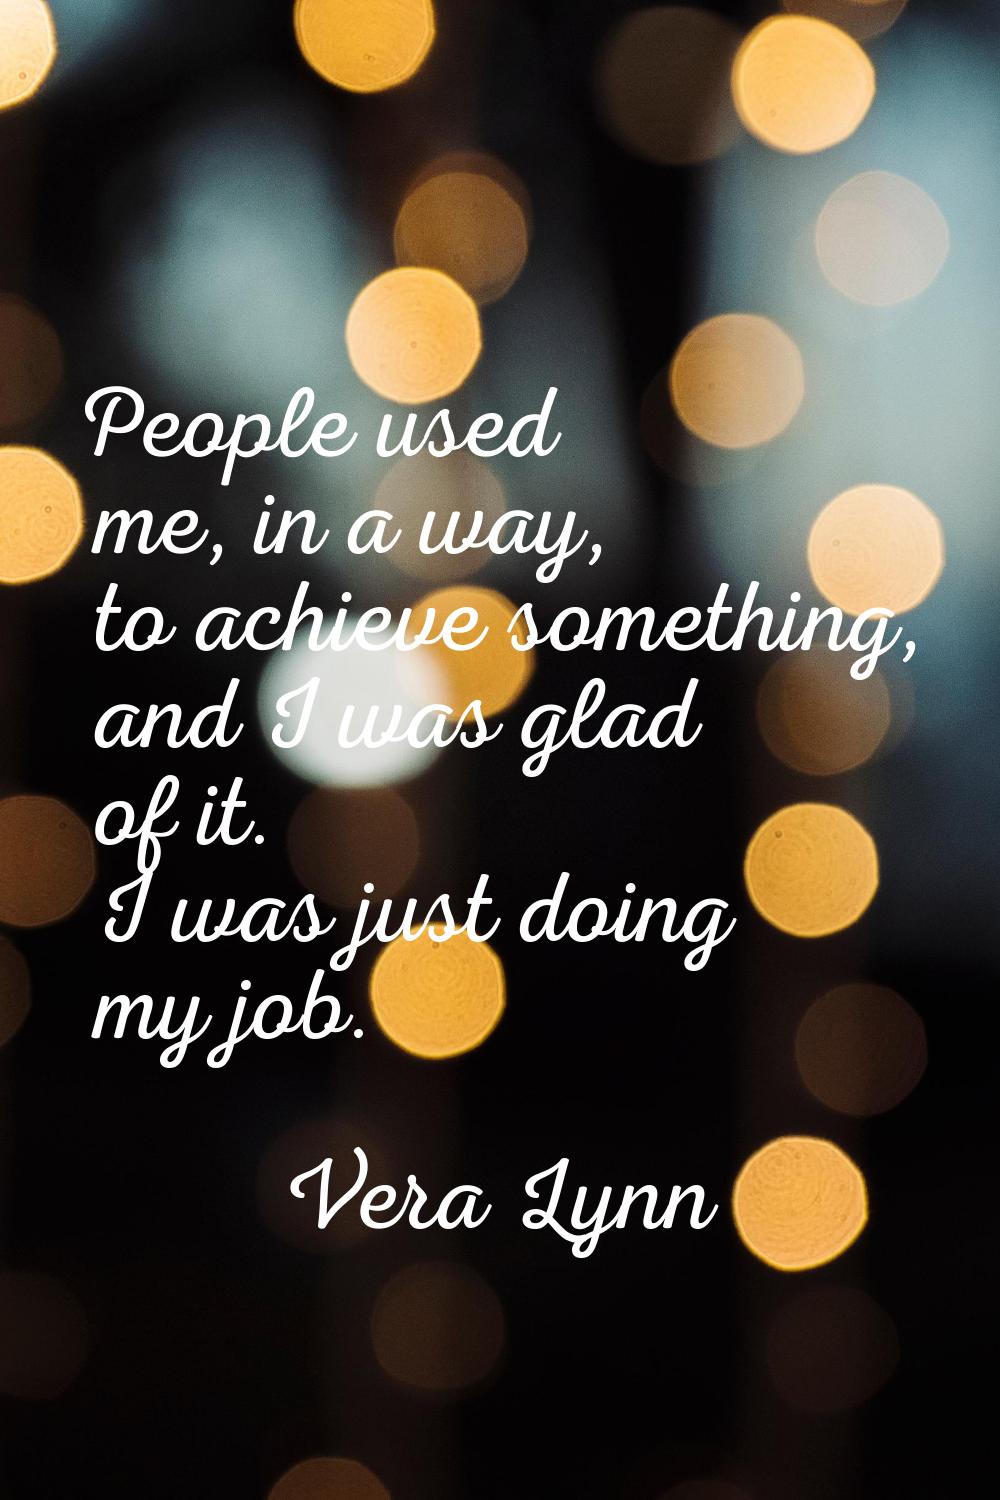 People used me, in a way, to achieve something, and I was glad of it. I was just doing my job.